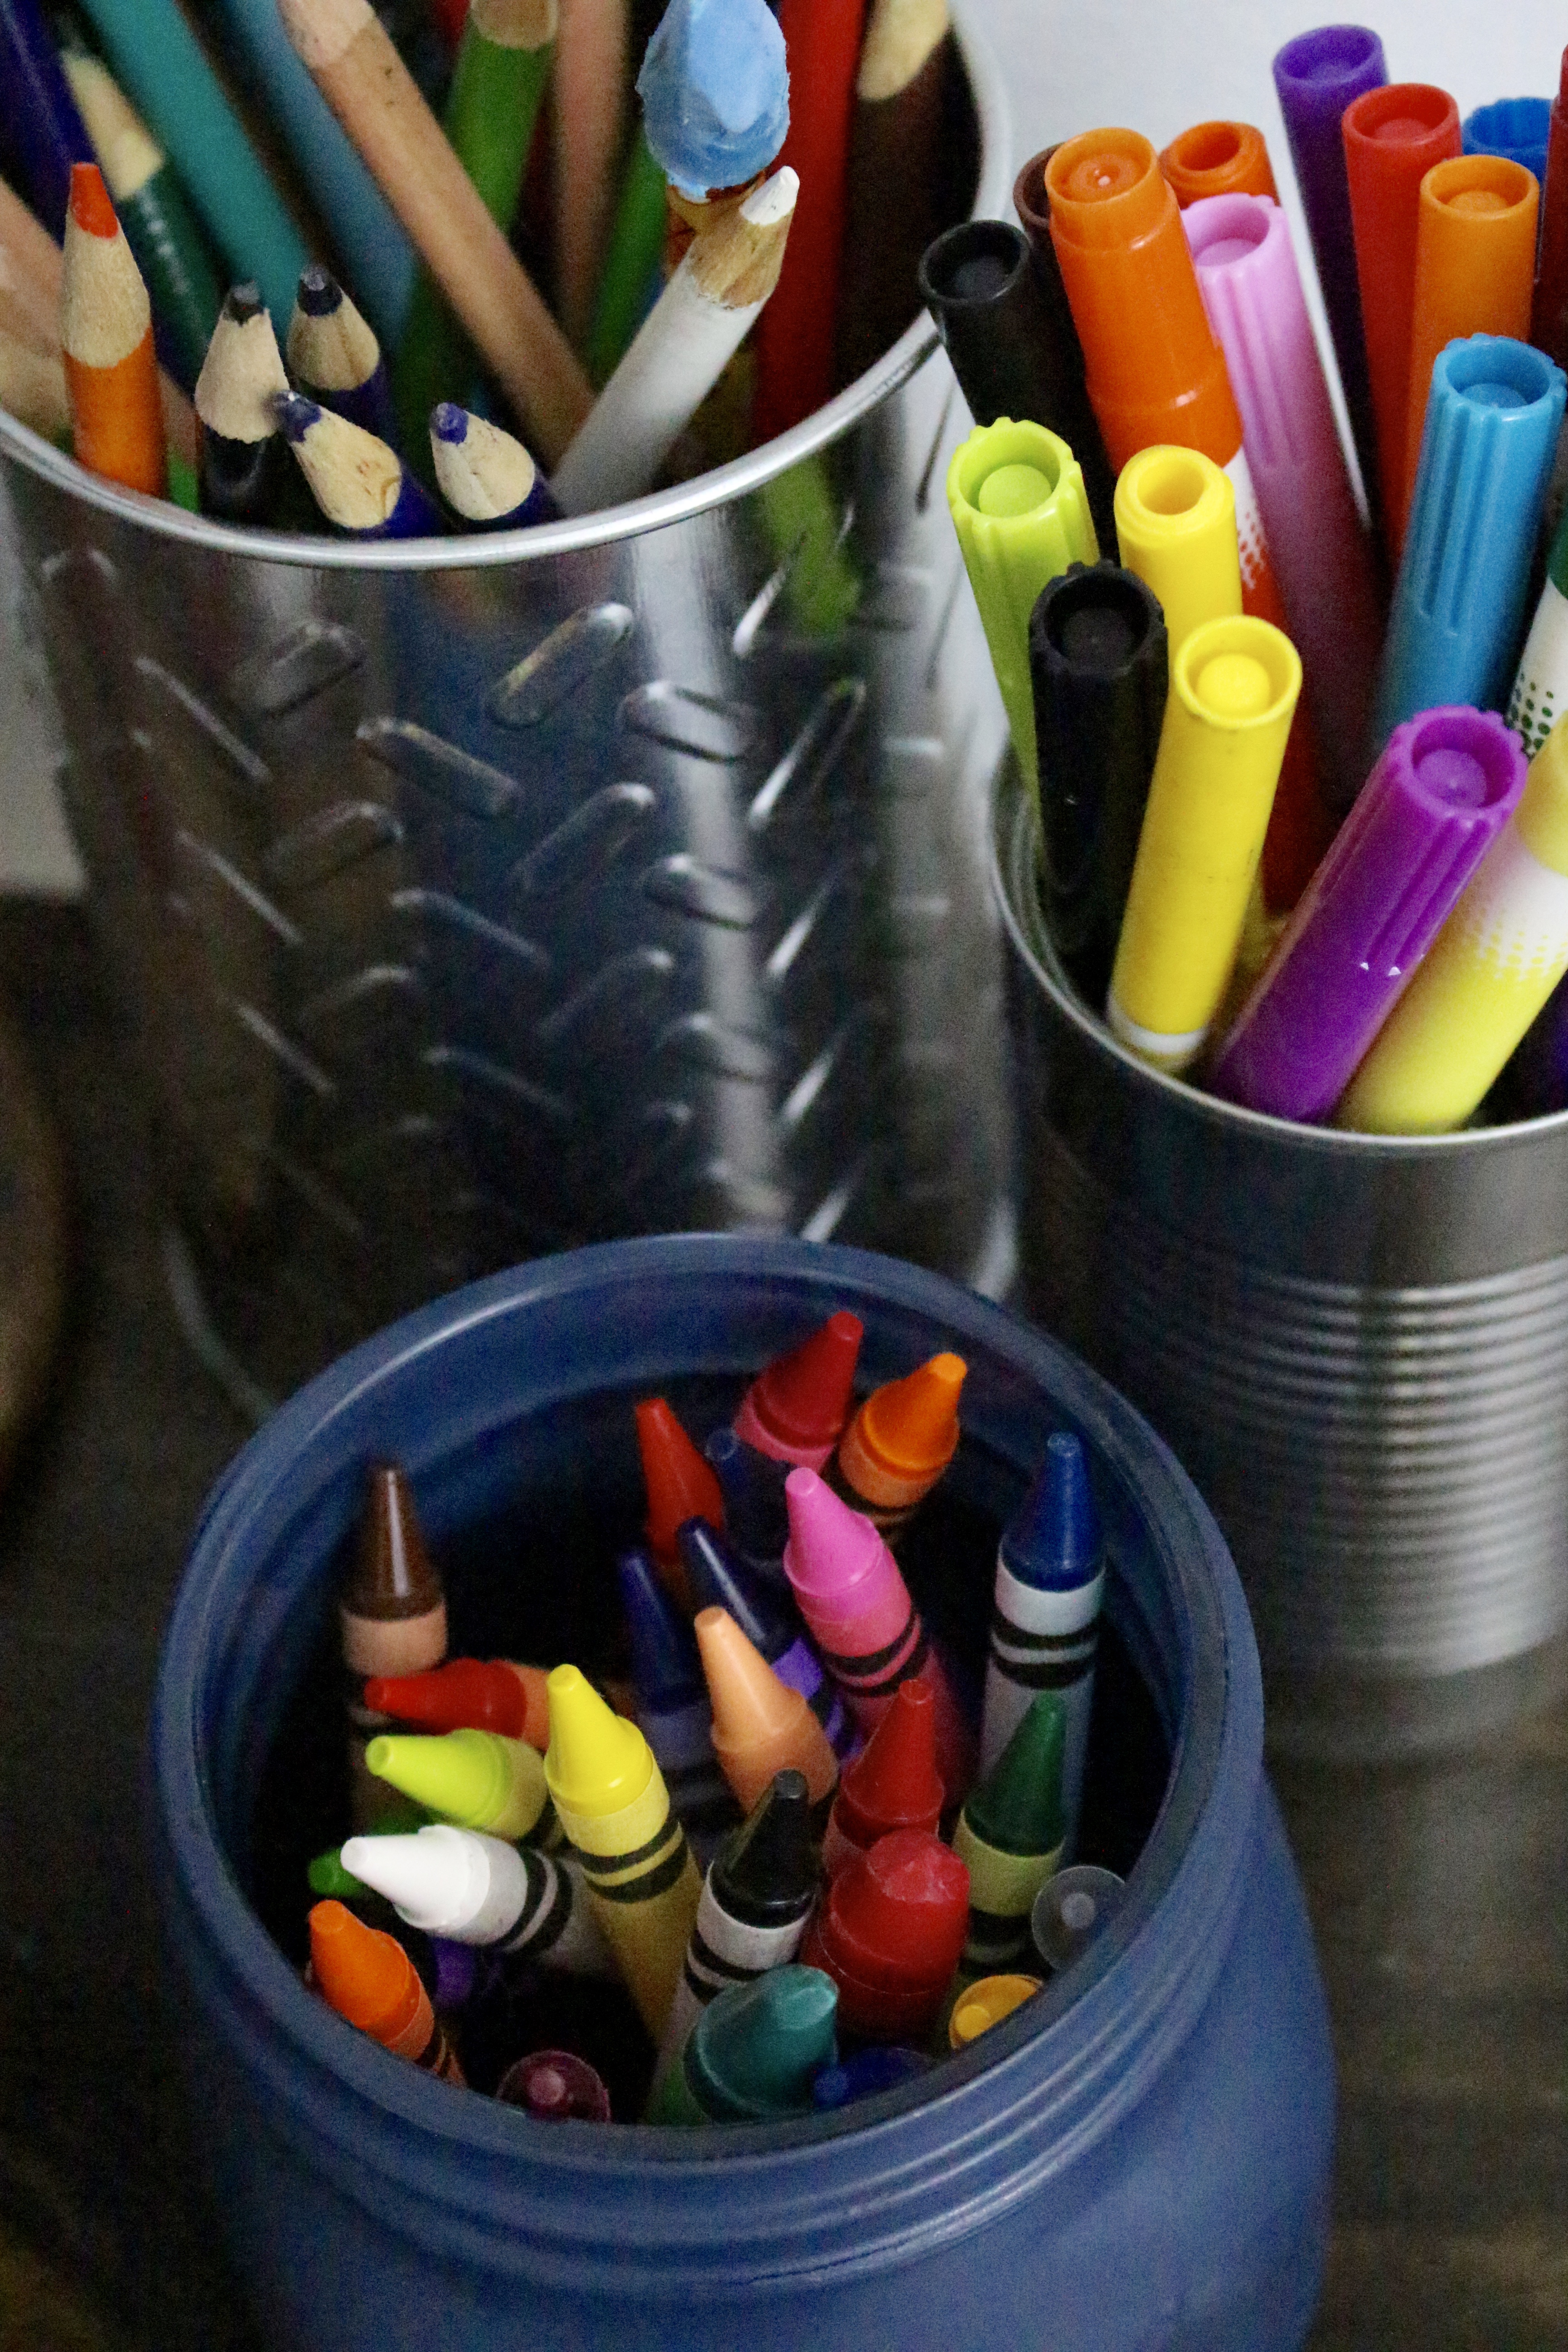 Art supplies in unique containers by www.whitecottagehomeandliving.com